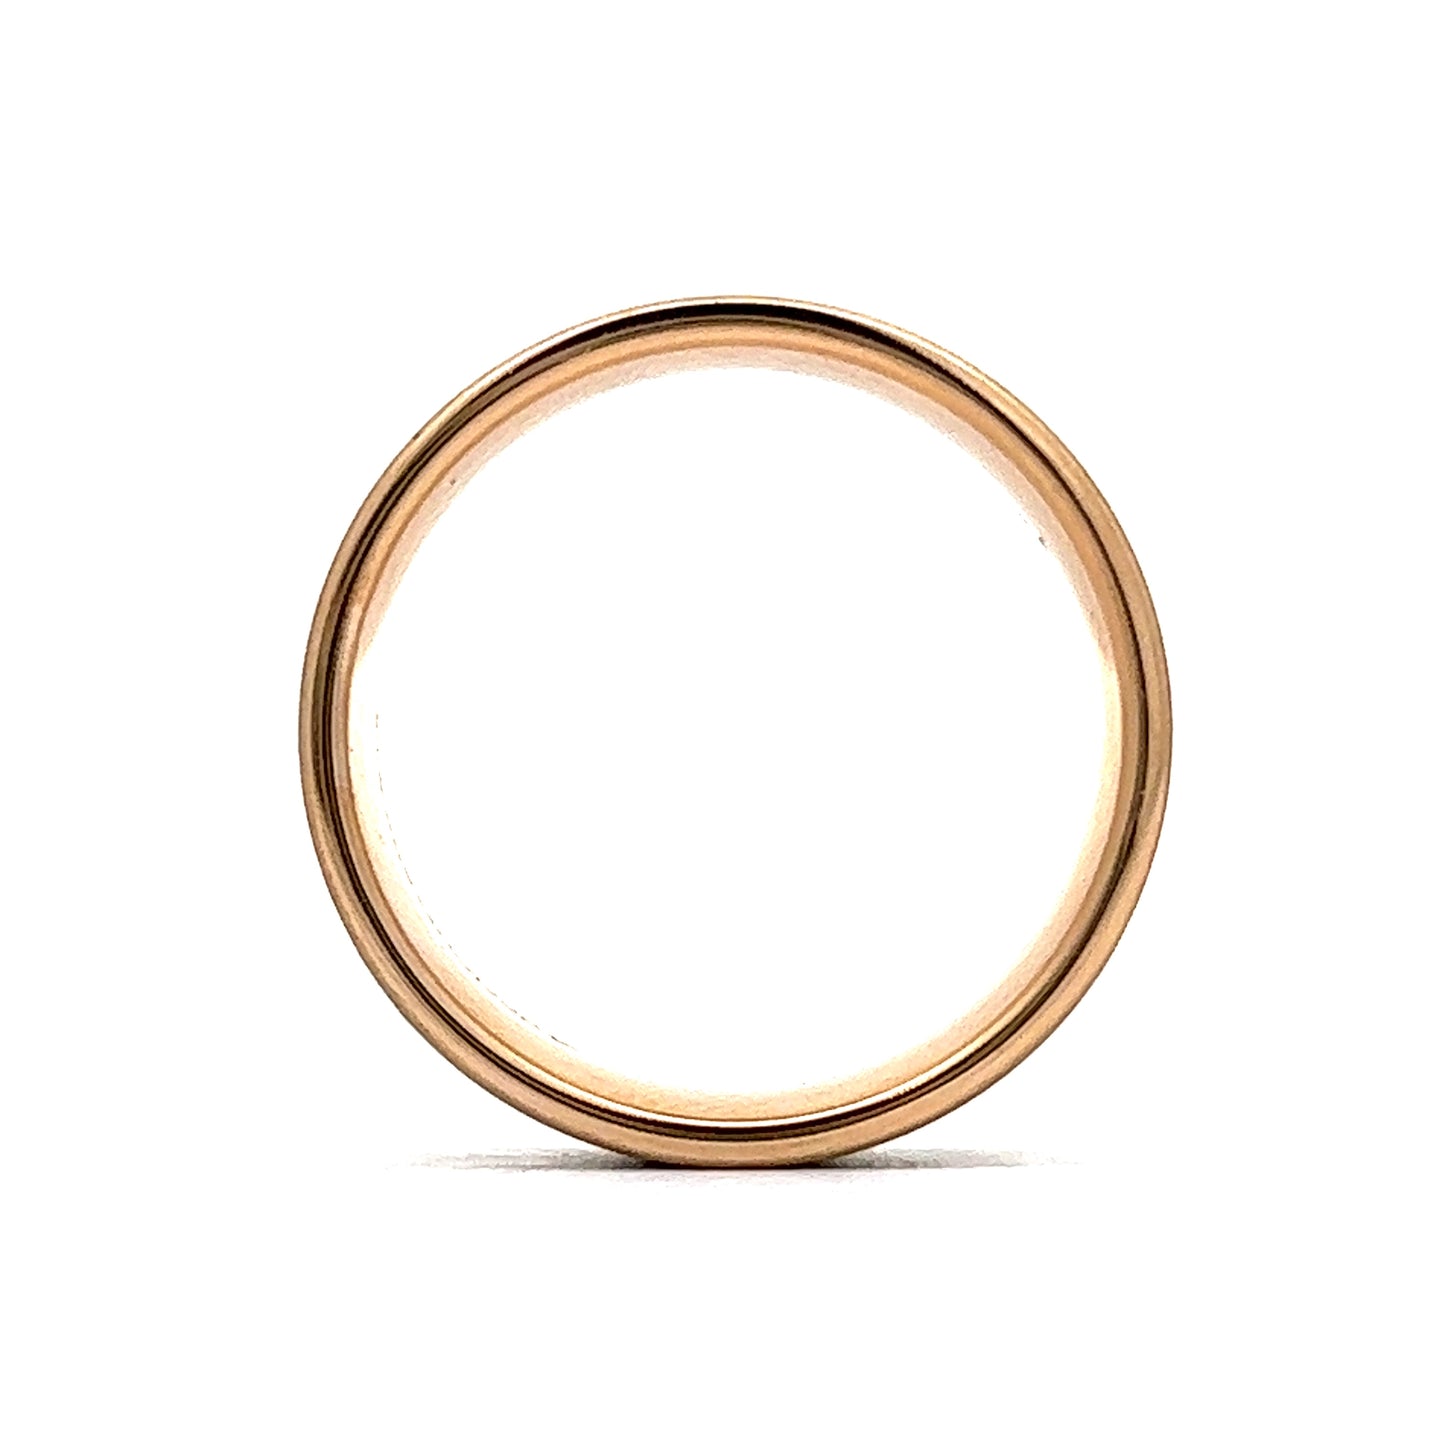 Men's Quaternary Knot Pattern Wedding Band in 14k Yellow Gold